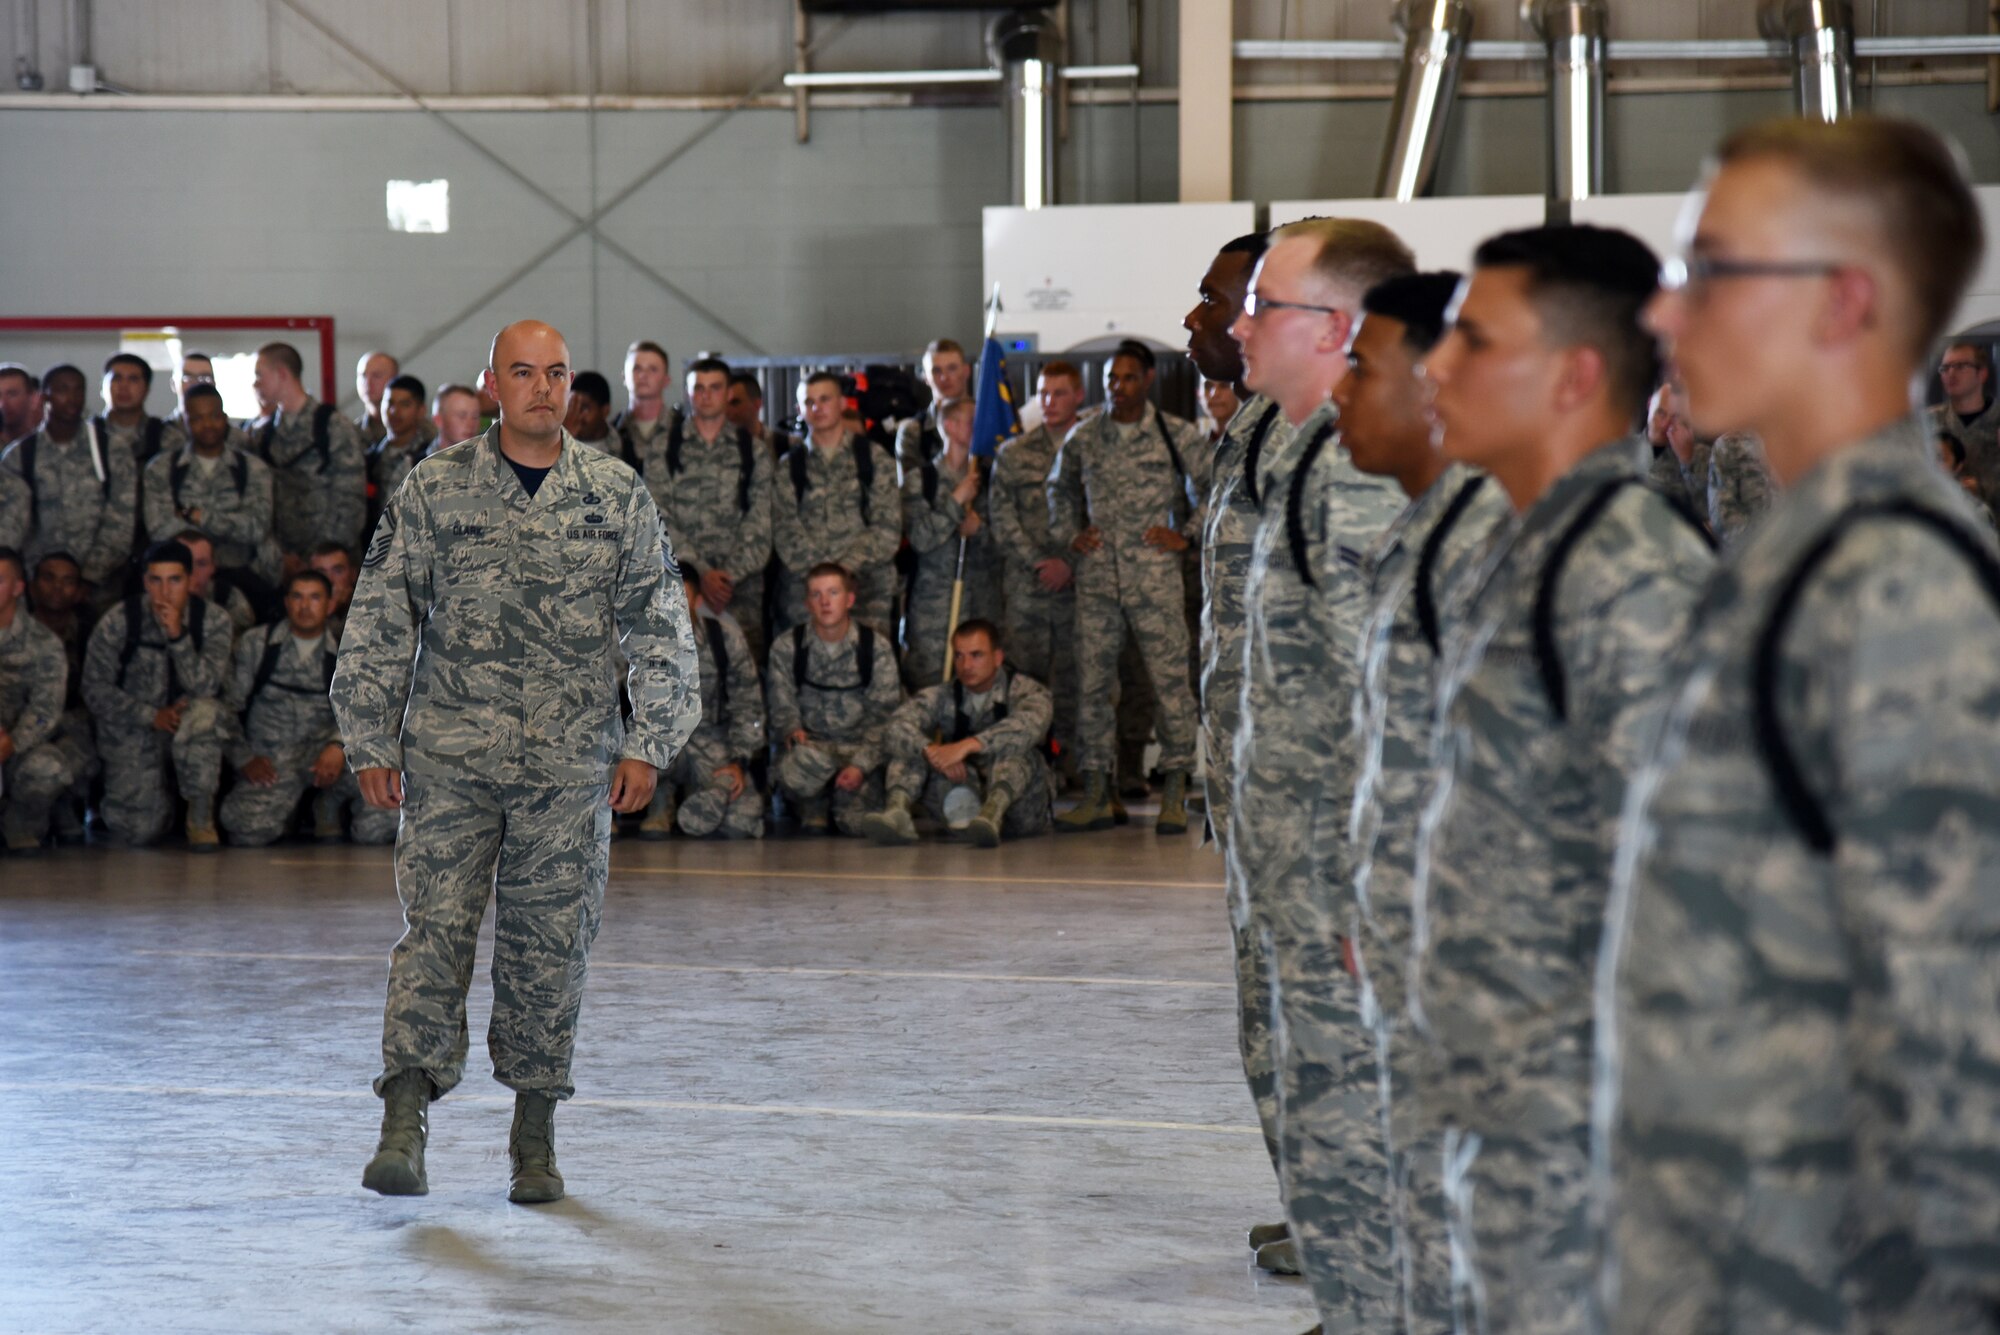 U.S. Air Force Senior Master Sgt. David Clark, 315th Training Squadron first sergeant, judges during the individual drill portion of the 17th Training Group drill competition at the Louis F. Garland Department of Defense Fire Academy on Goodfellow Air Force Base, Texas, June 22, 2018. During the individual drill, trainees received a series of commands with individuals becoming disqualified for performing the wrong movement. (U.S. Air Force photo by Staff Sgt. Joshua Edwards/Released)